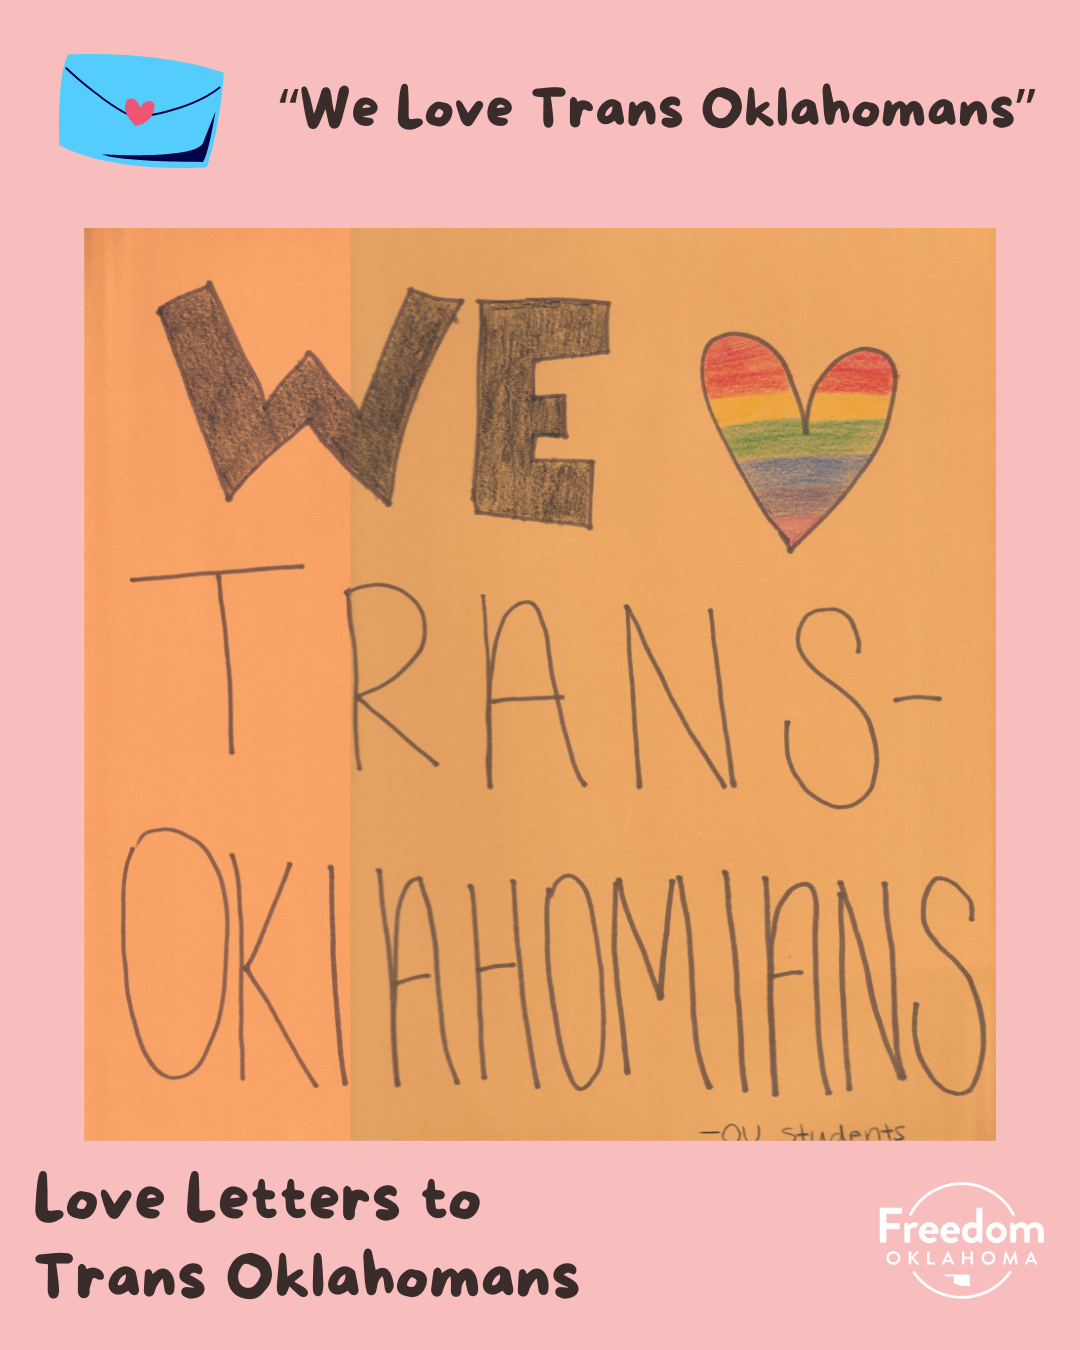  Similar pink graphic with artwork in the center: "We&nbsp;rainbow heart&nbsp;Trans Oklahomans - OU Students" written on an orange piece of paper. 